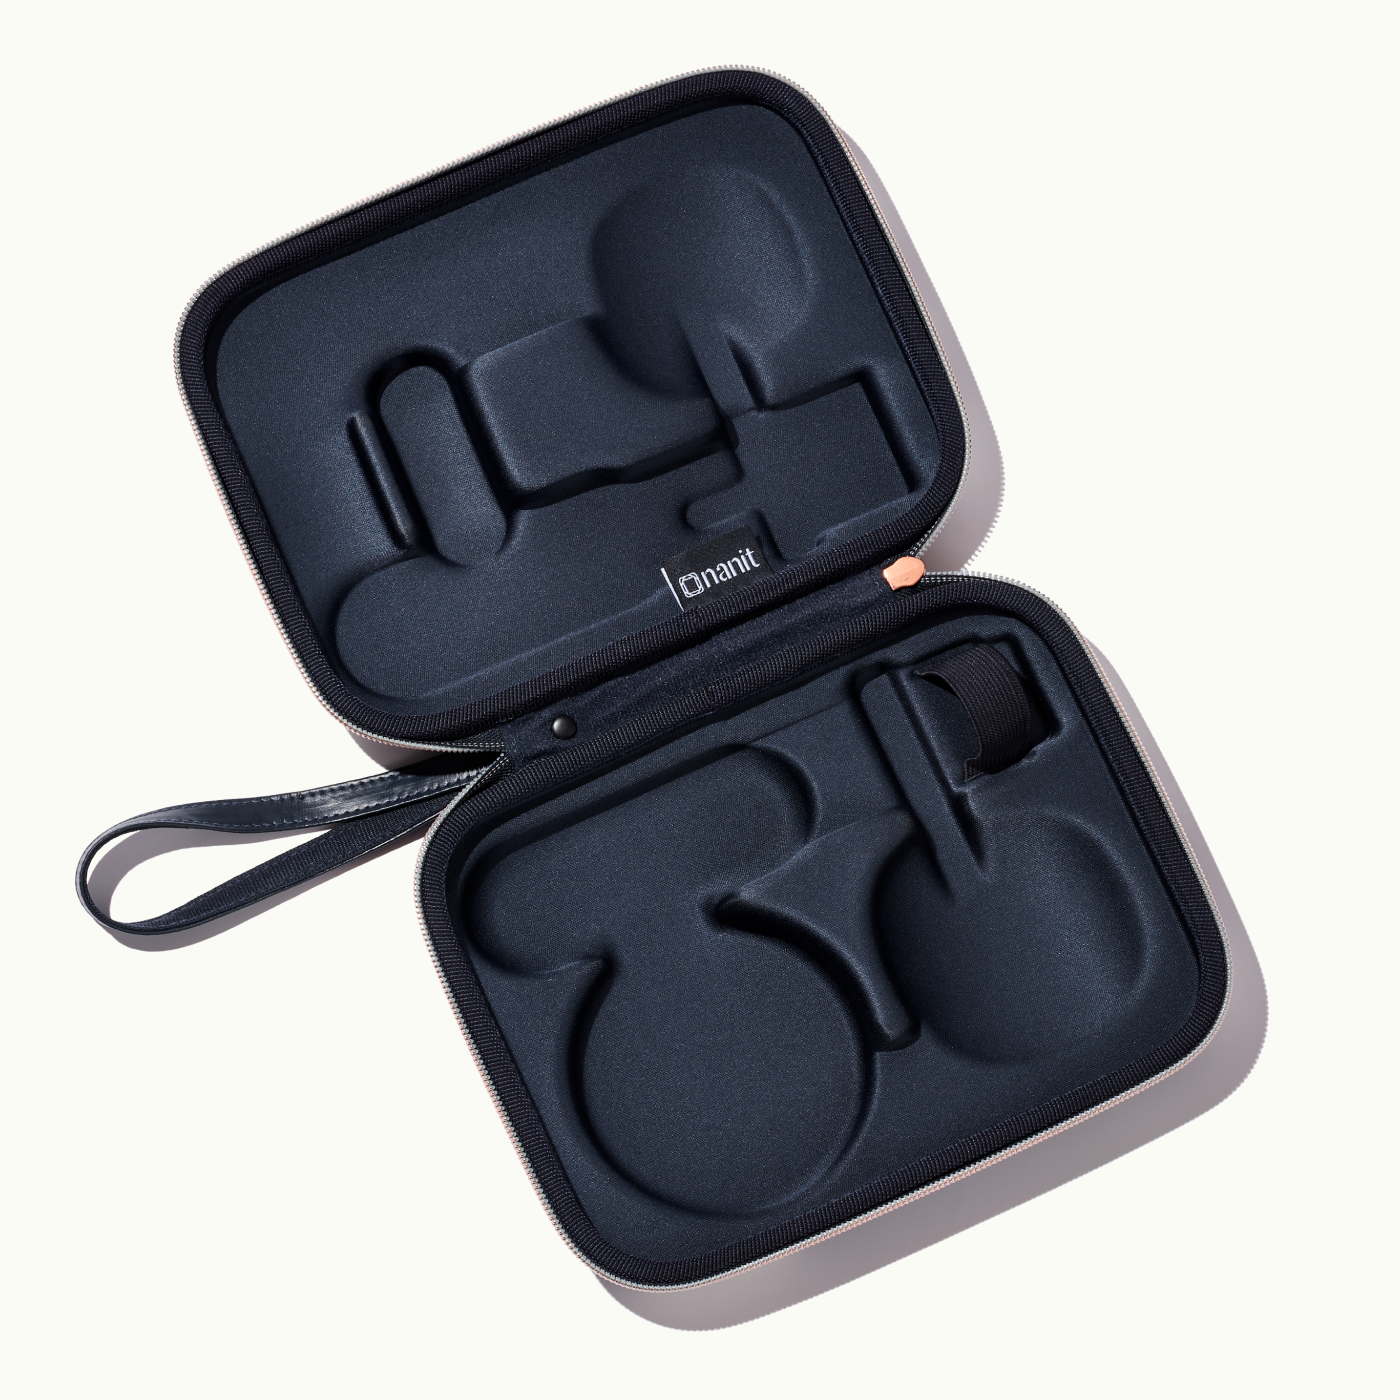 Nanit Clearance Travel Case